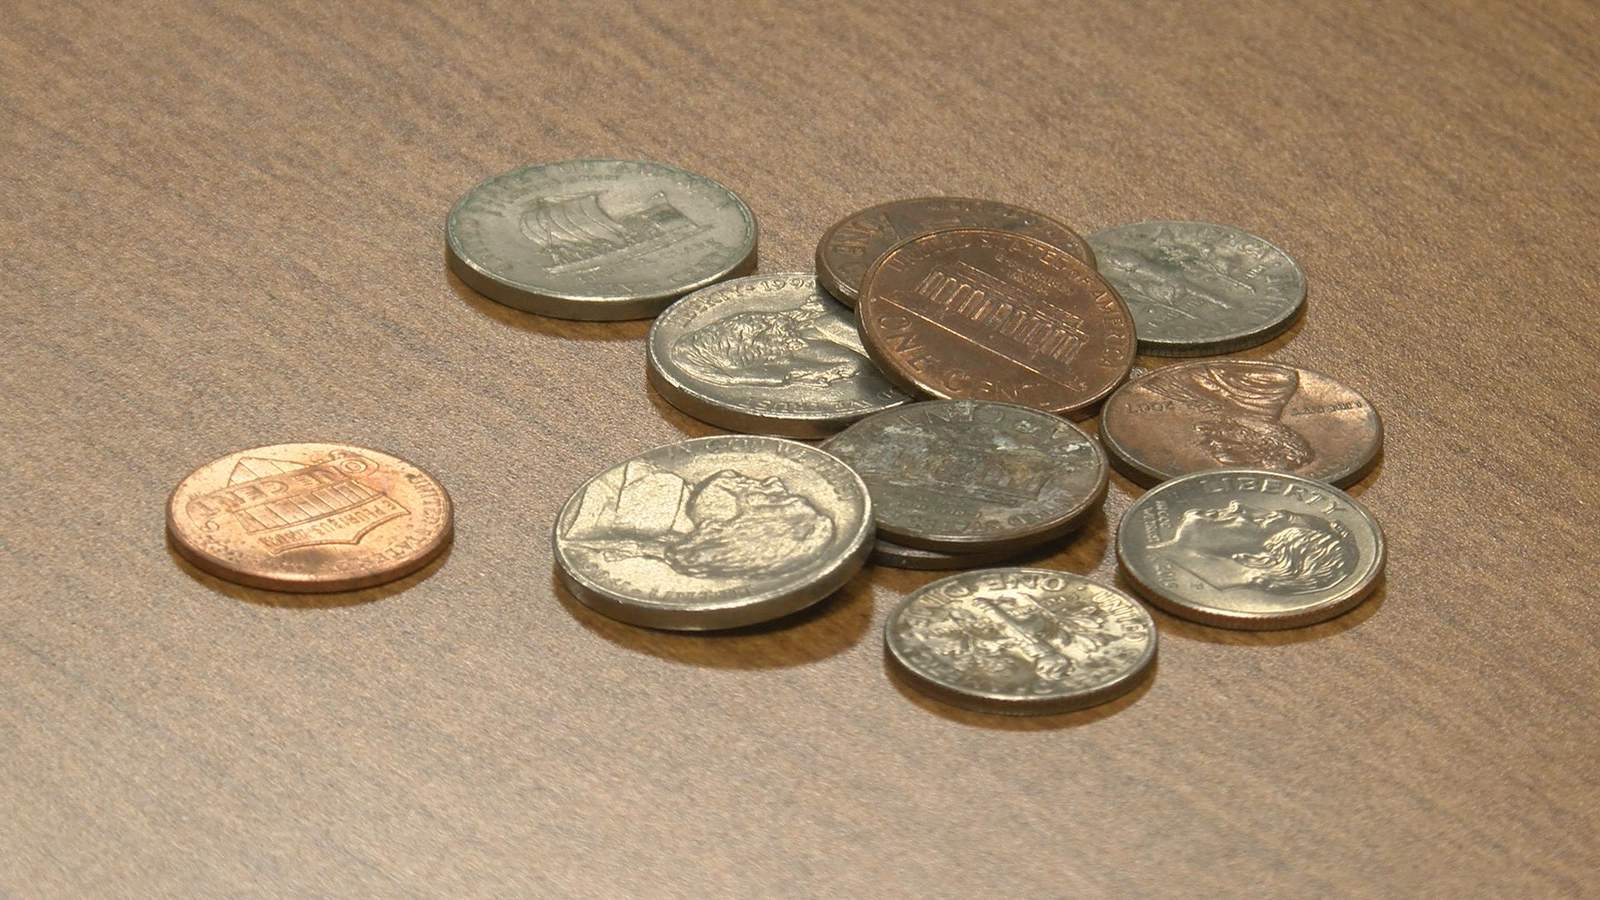 Ask 2: Is it legal for stores to not provide correct change or refuse cash altogether?